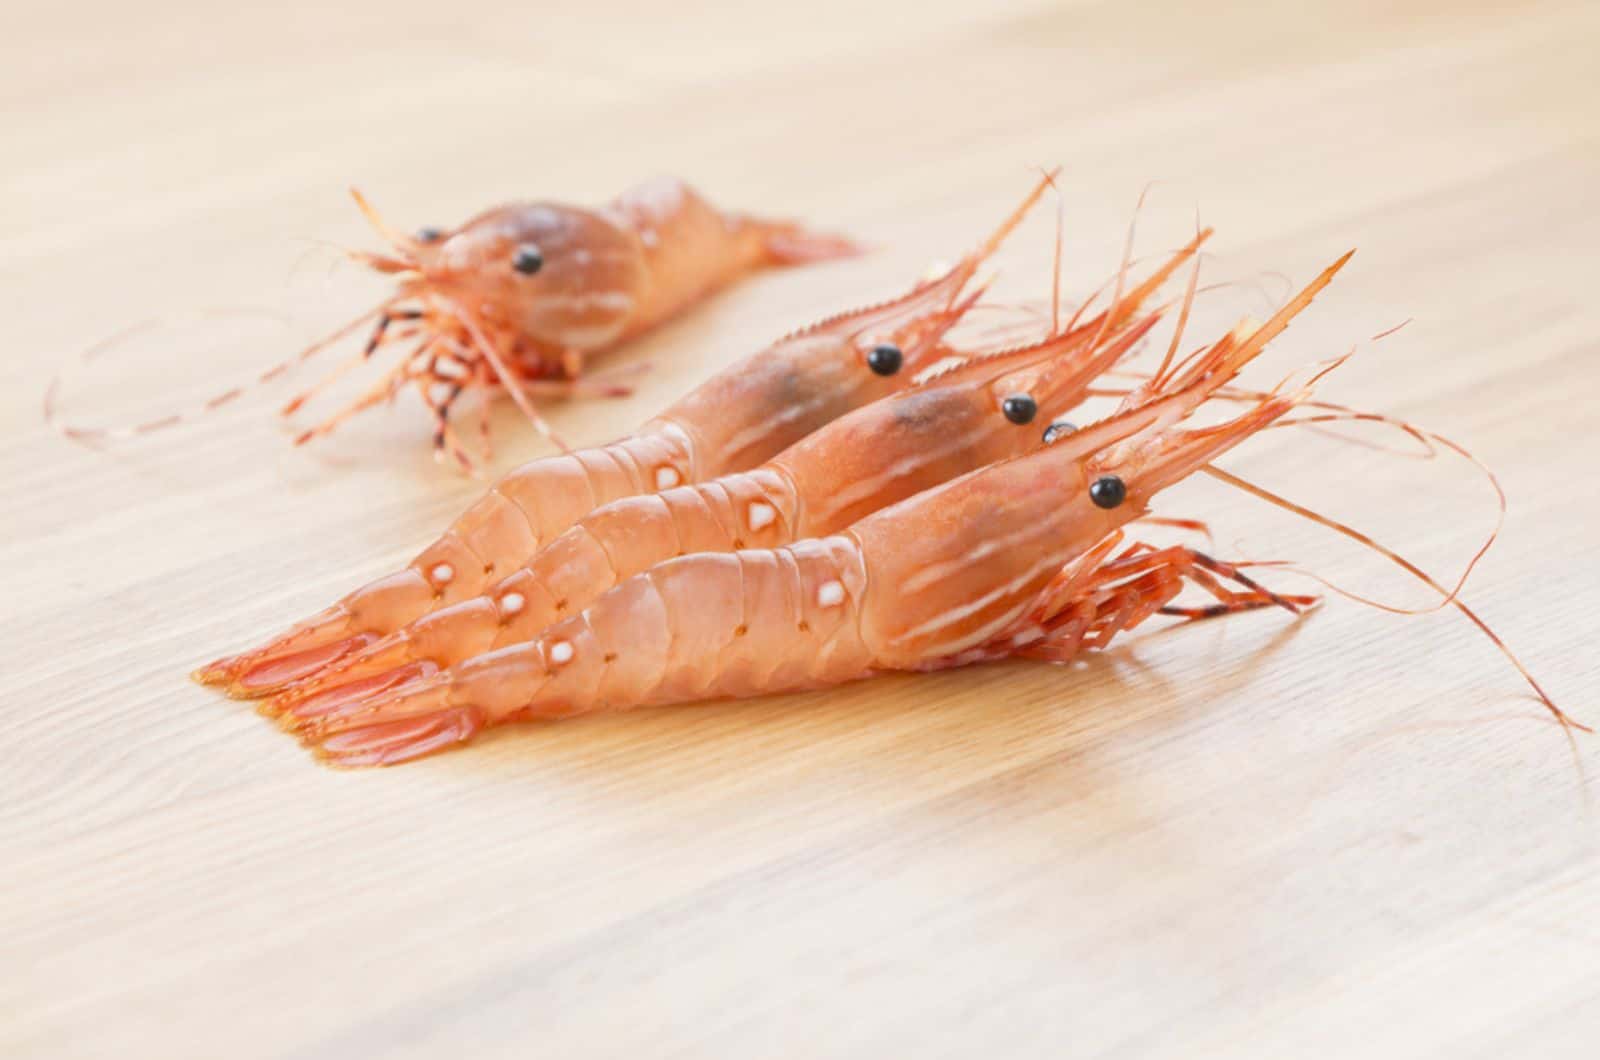 white spotted shrimps on the table